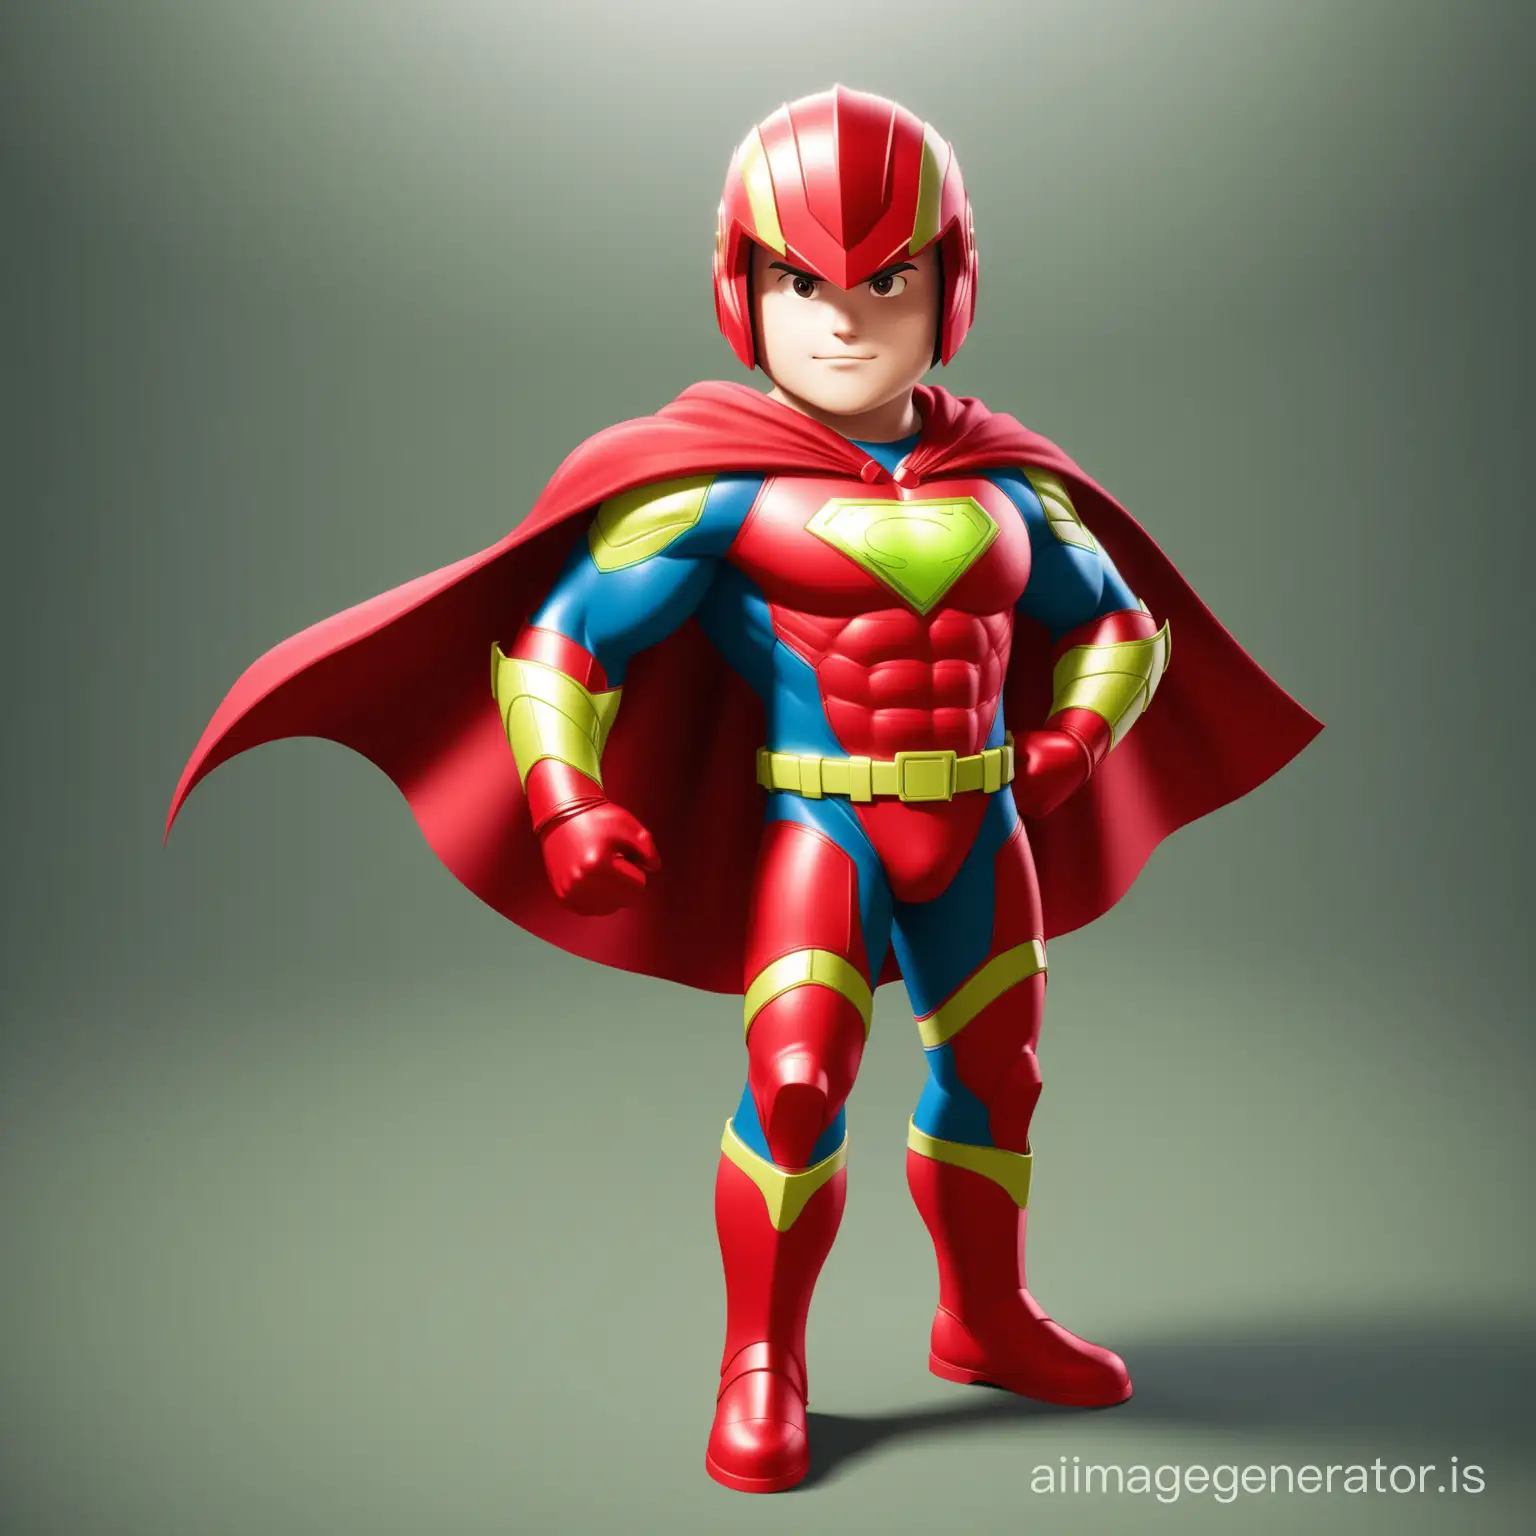 RedCaped-Superhero-Recycling-Warrior-in-CGI-Character